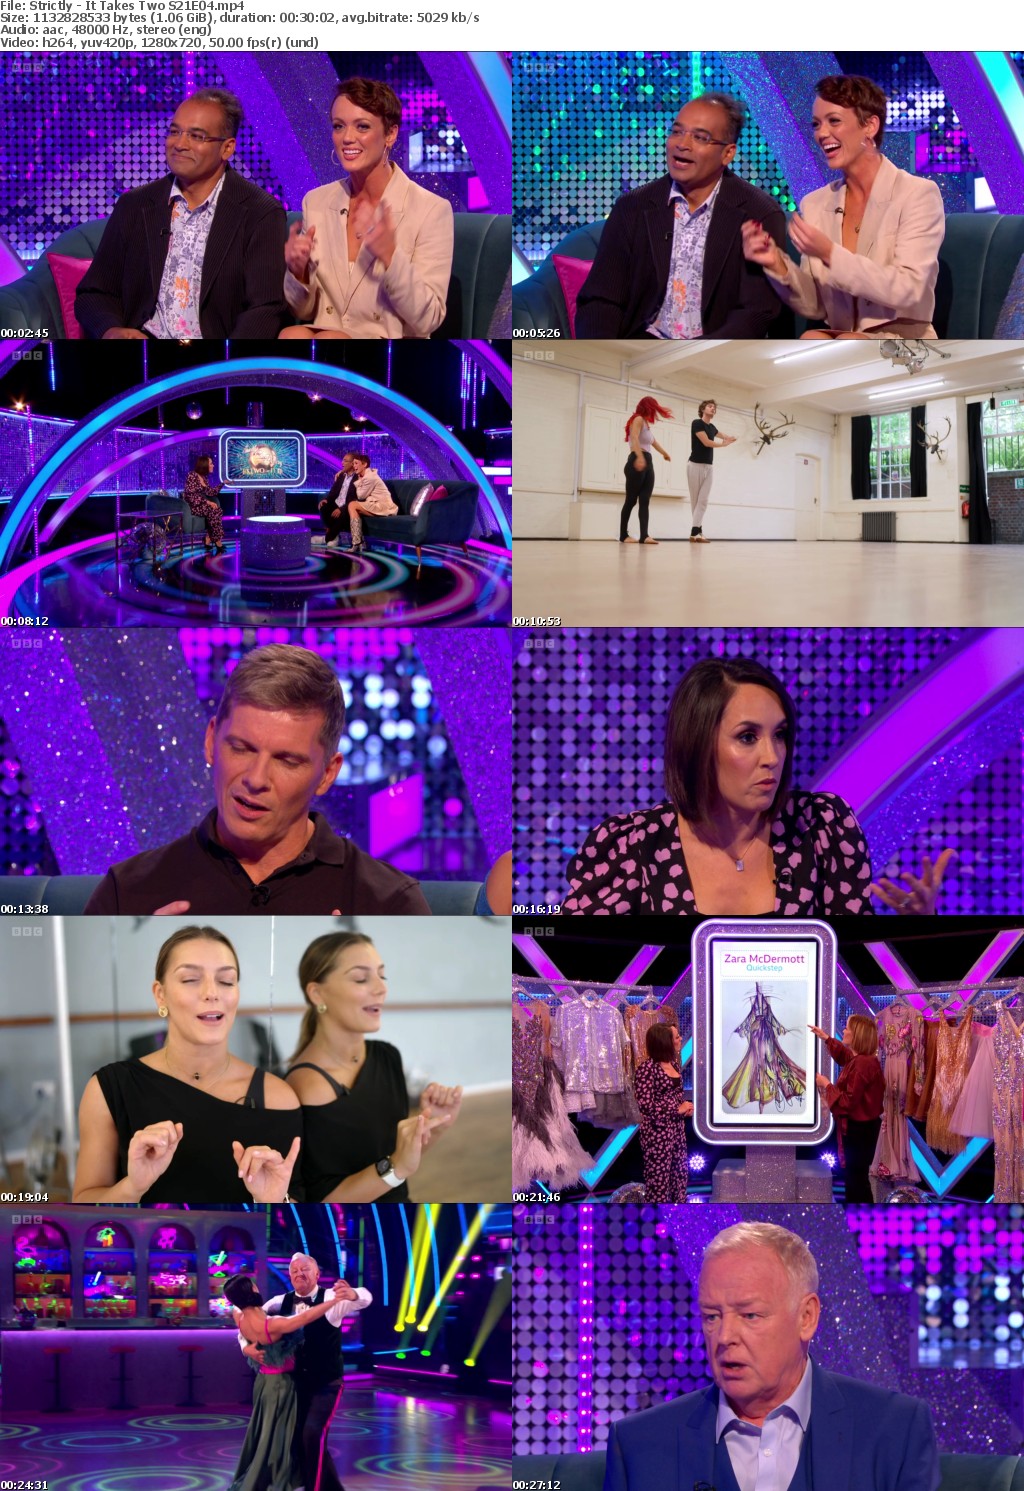 Strictly - It Takes Two S21E04 (1280x720p HD, 50fps, soft Eng subs)